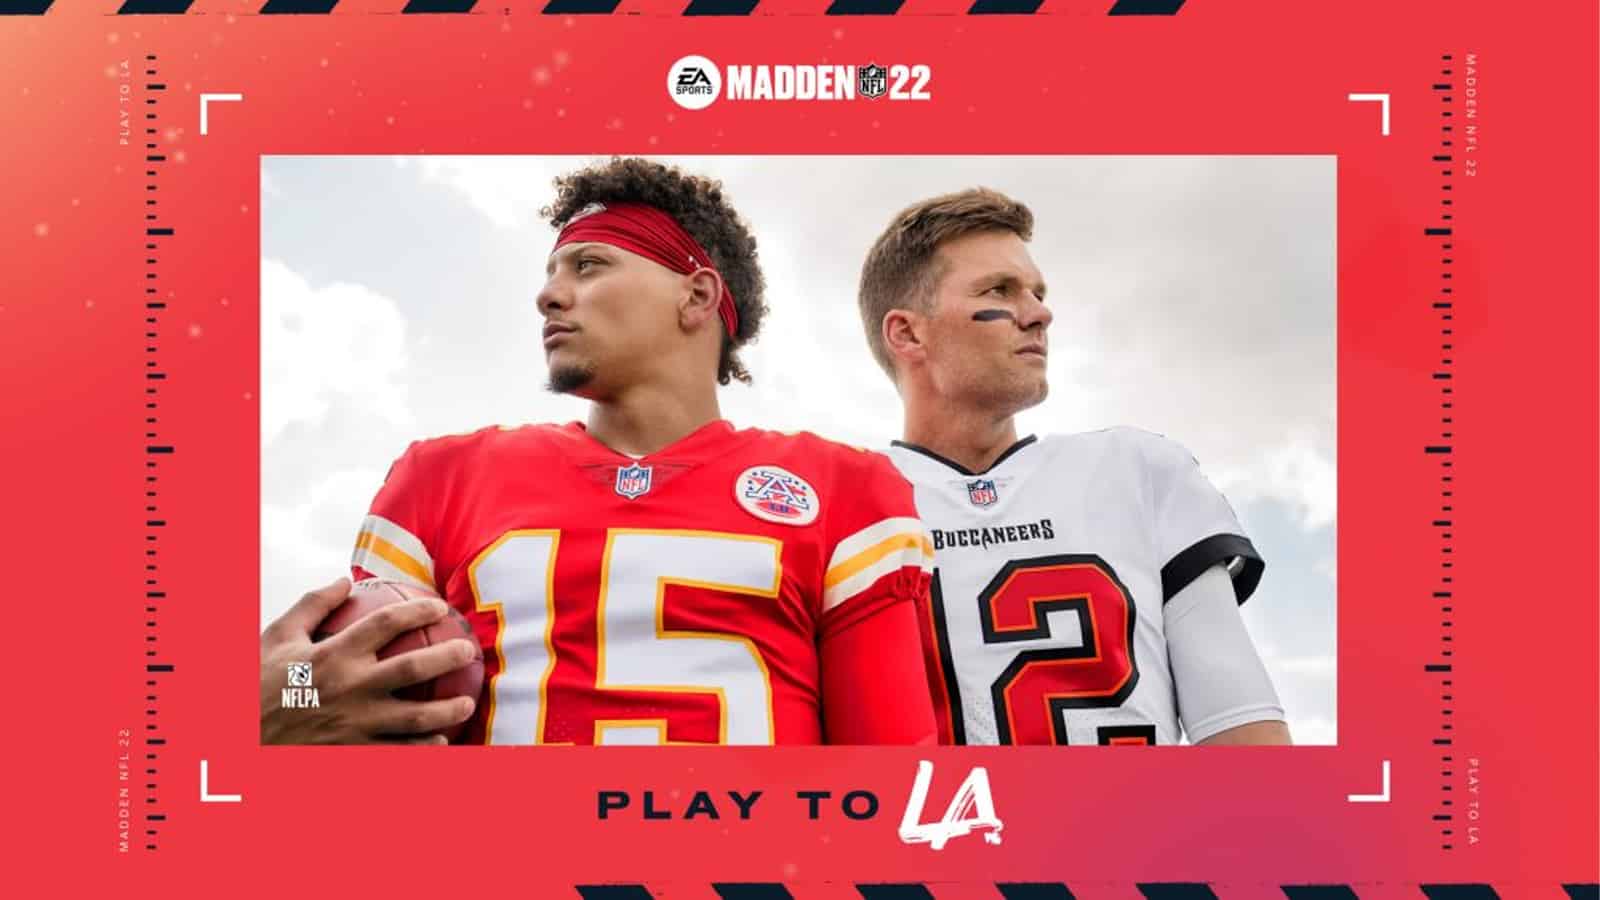 Official cover poster of Madden 22 NFL